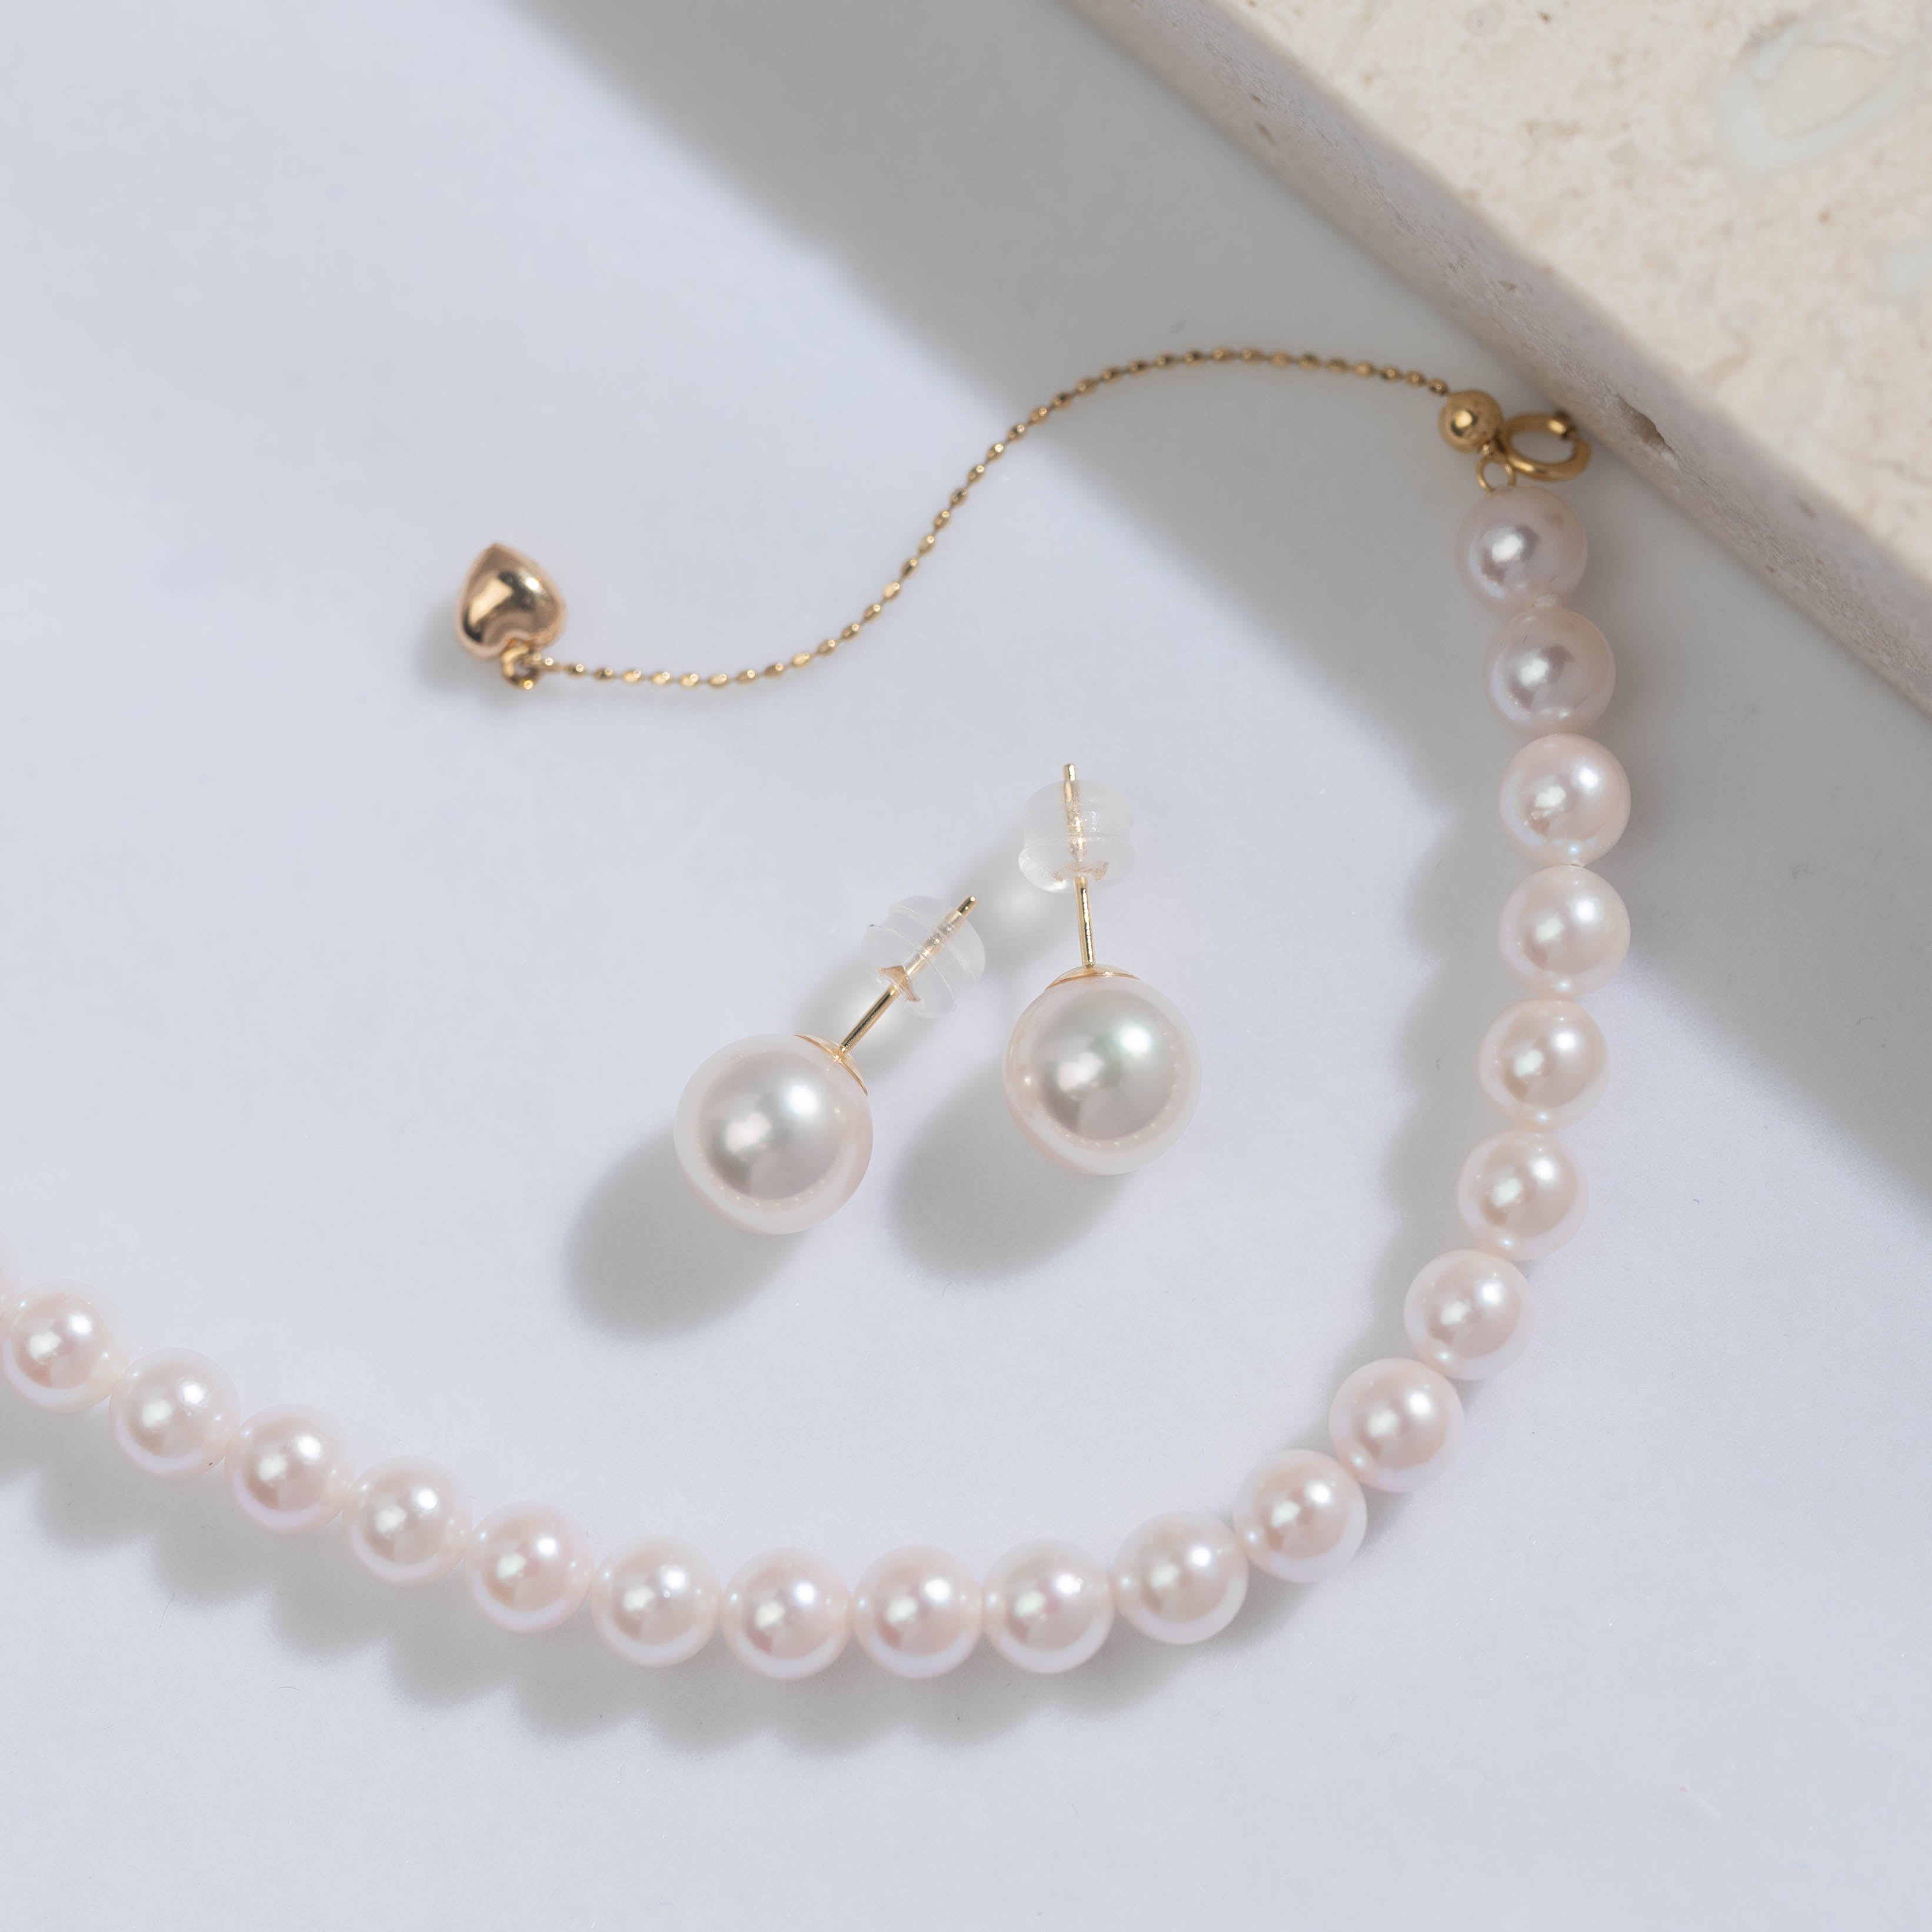 Amazoncojp PLUSTER Hanadama Pearl Necklace Pearl Necklace Akoya  Genuine Pearl from Uwashima Womens Bonus Item Included Pearl Pearl   Clothing Shoes  Jewelry